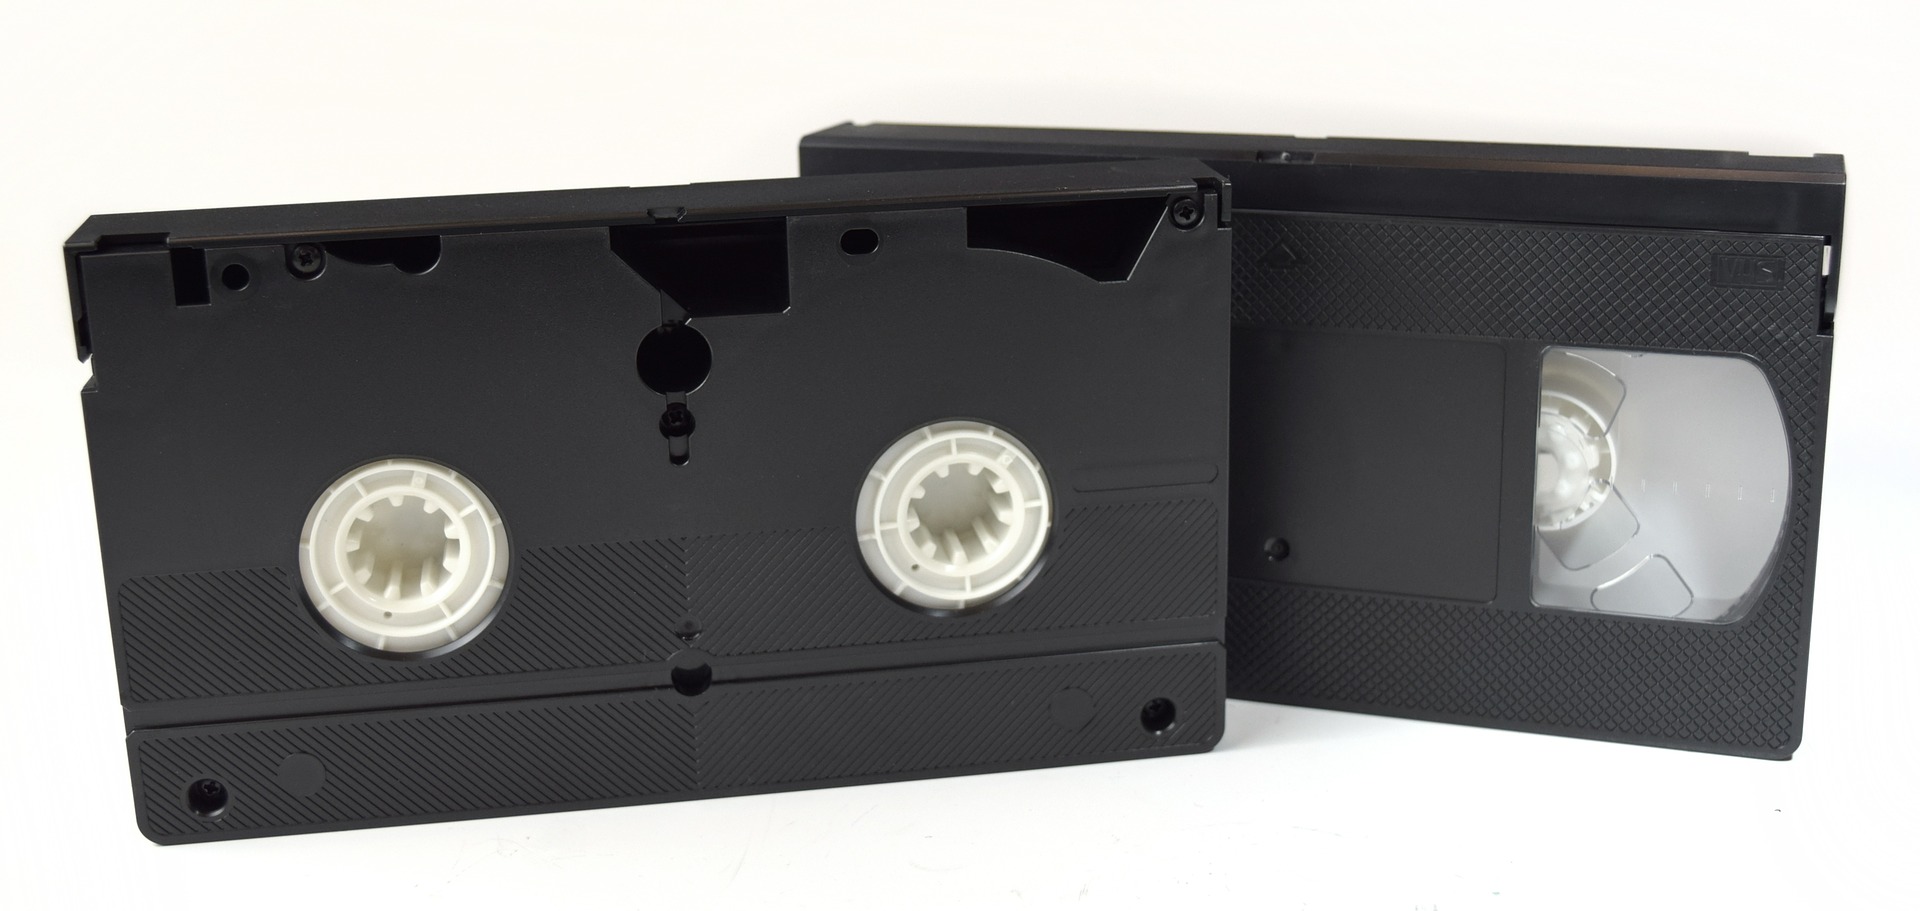 VHS Tape Lifespan: How Long Do VHS Tapes Last? Do VHS Tapes Deteriorate?